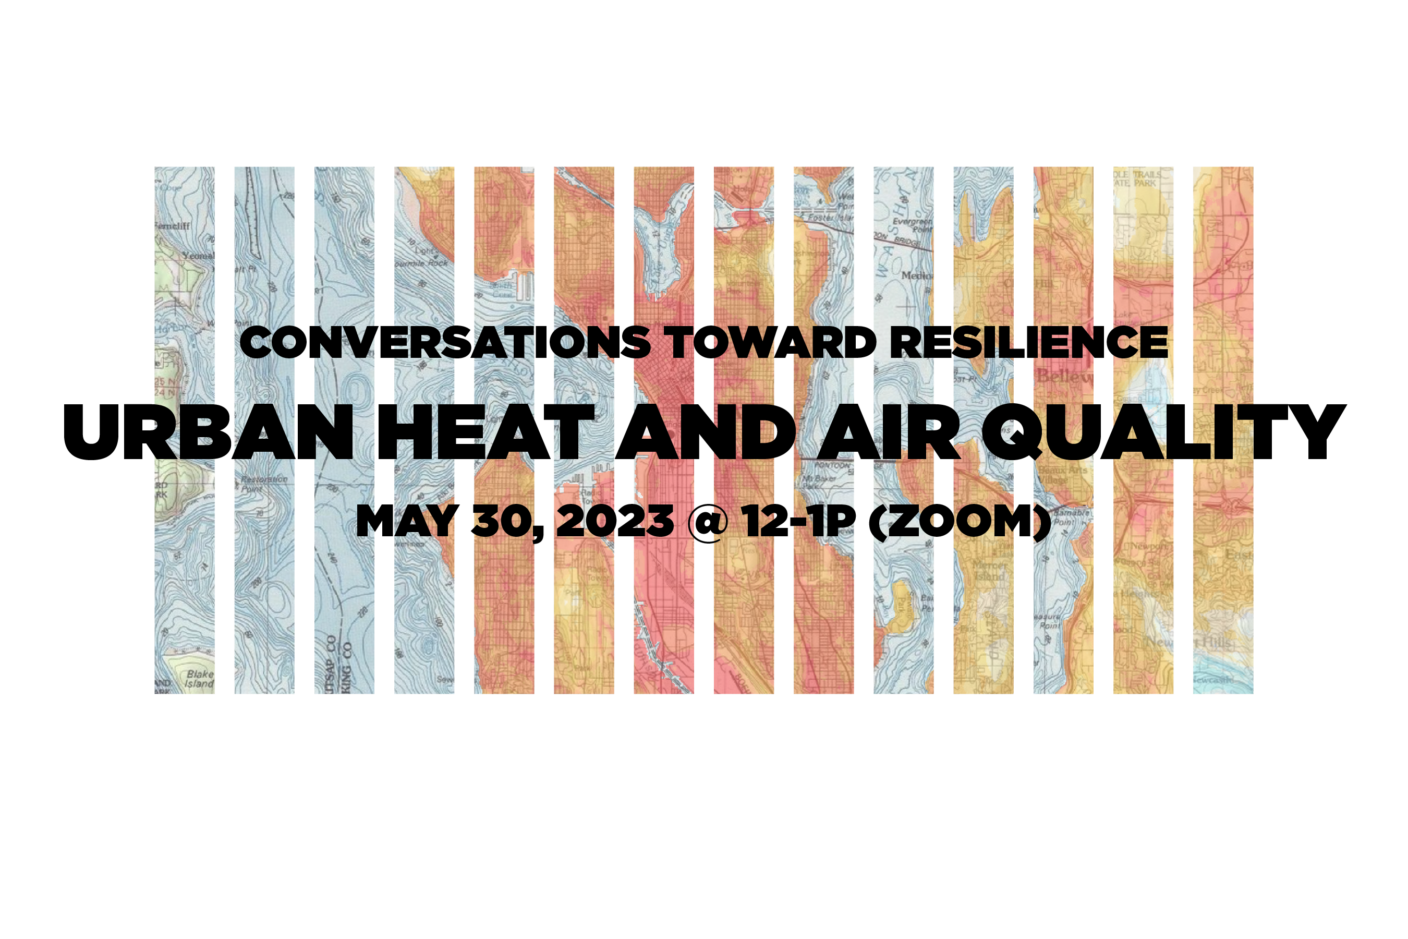 Join AIA Seattle's Adaptation and Resilience Committee for a panel discussion on urban heat and air quality in the Puget Sound region. Our panelists will share their latest research, design strategies, and community-based initiatives related to the complexities of equitably addressing urban heat and air quality at a variety of project scales. Audience questions and discussion will follow presentations by each panelist.